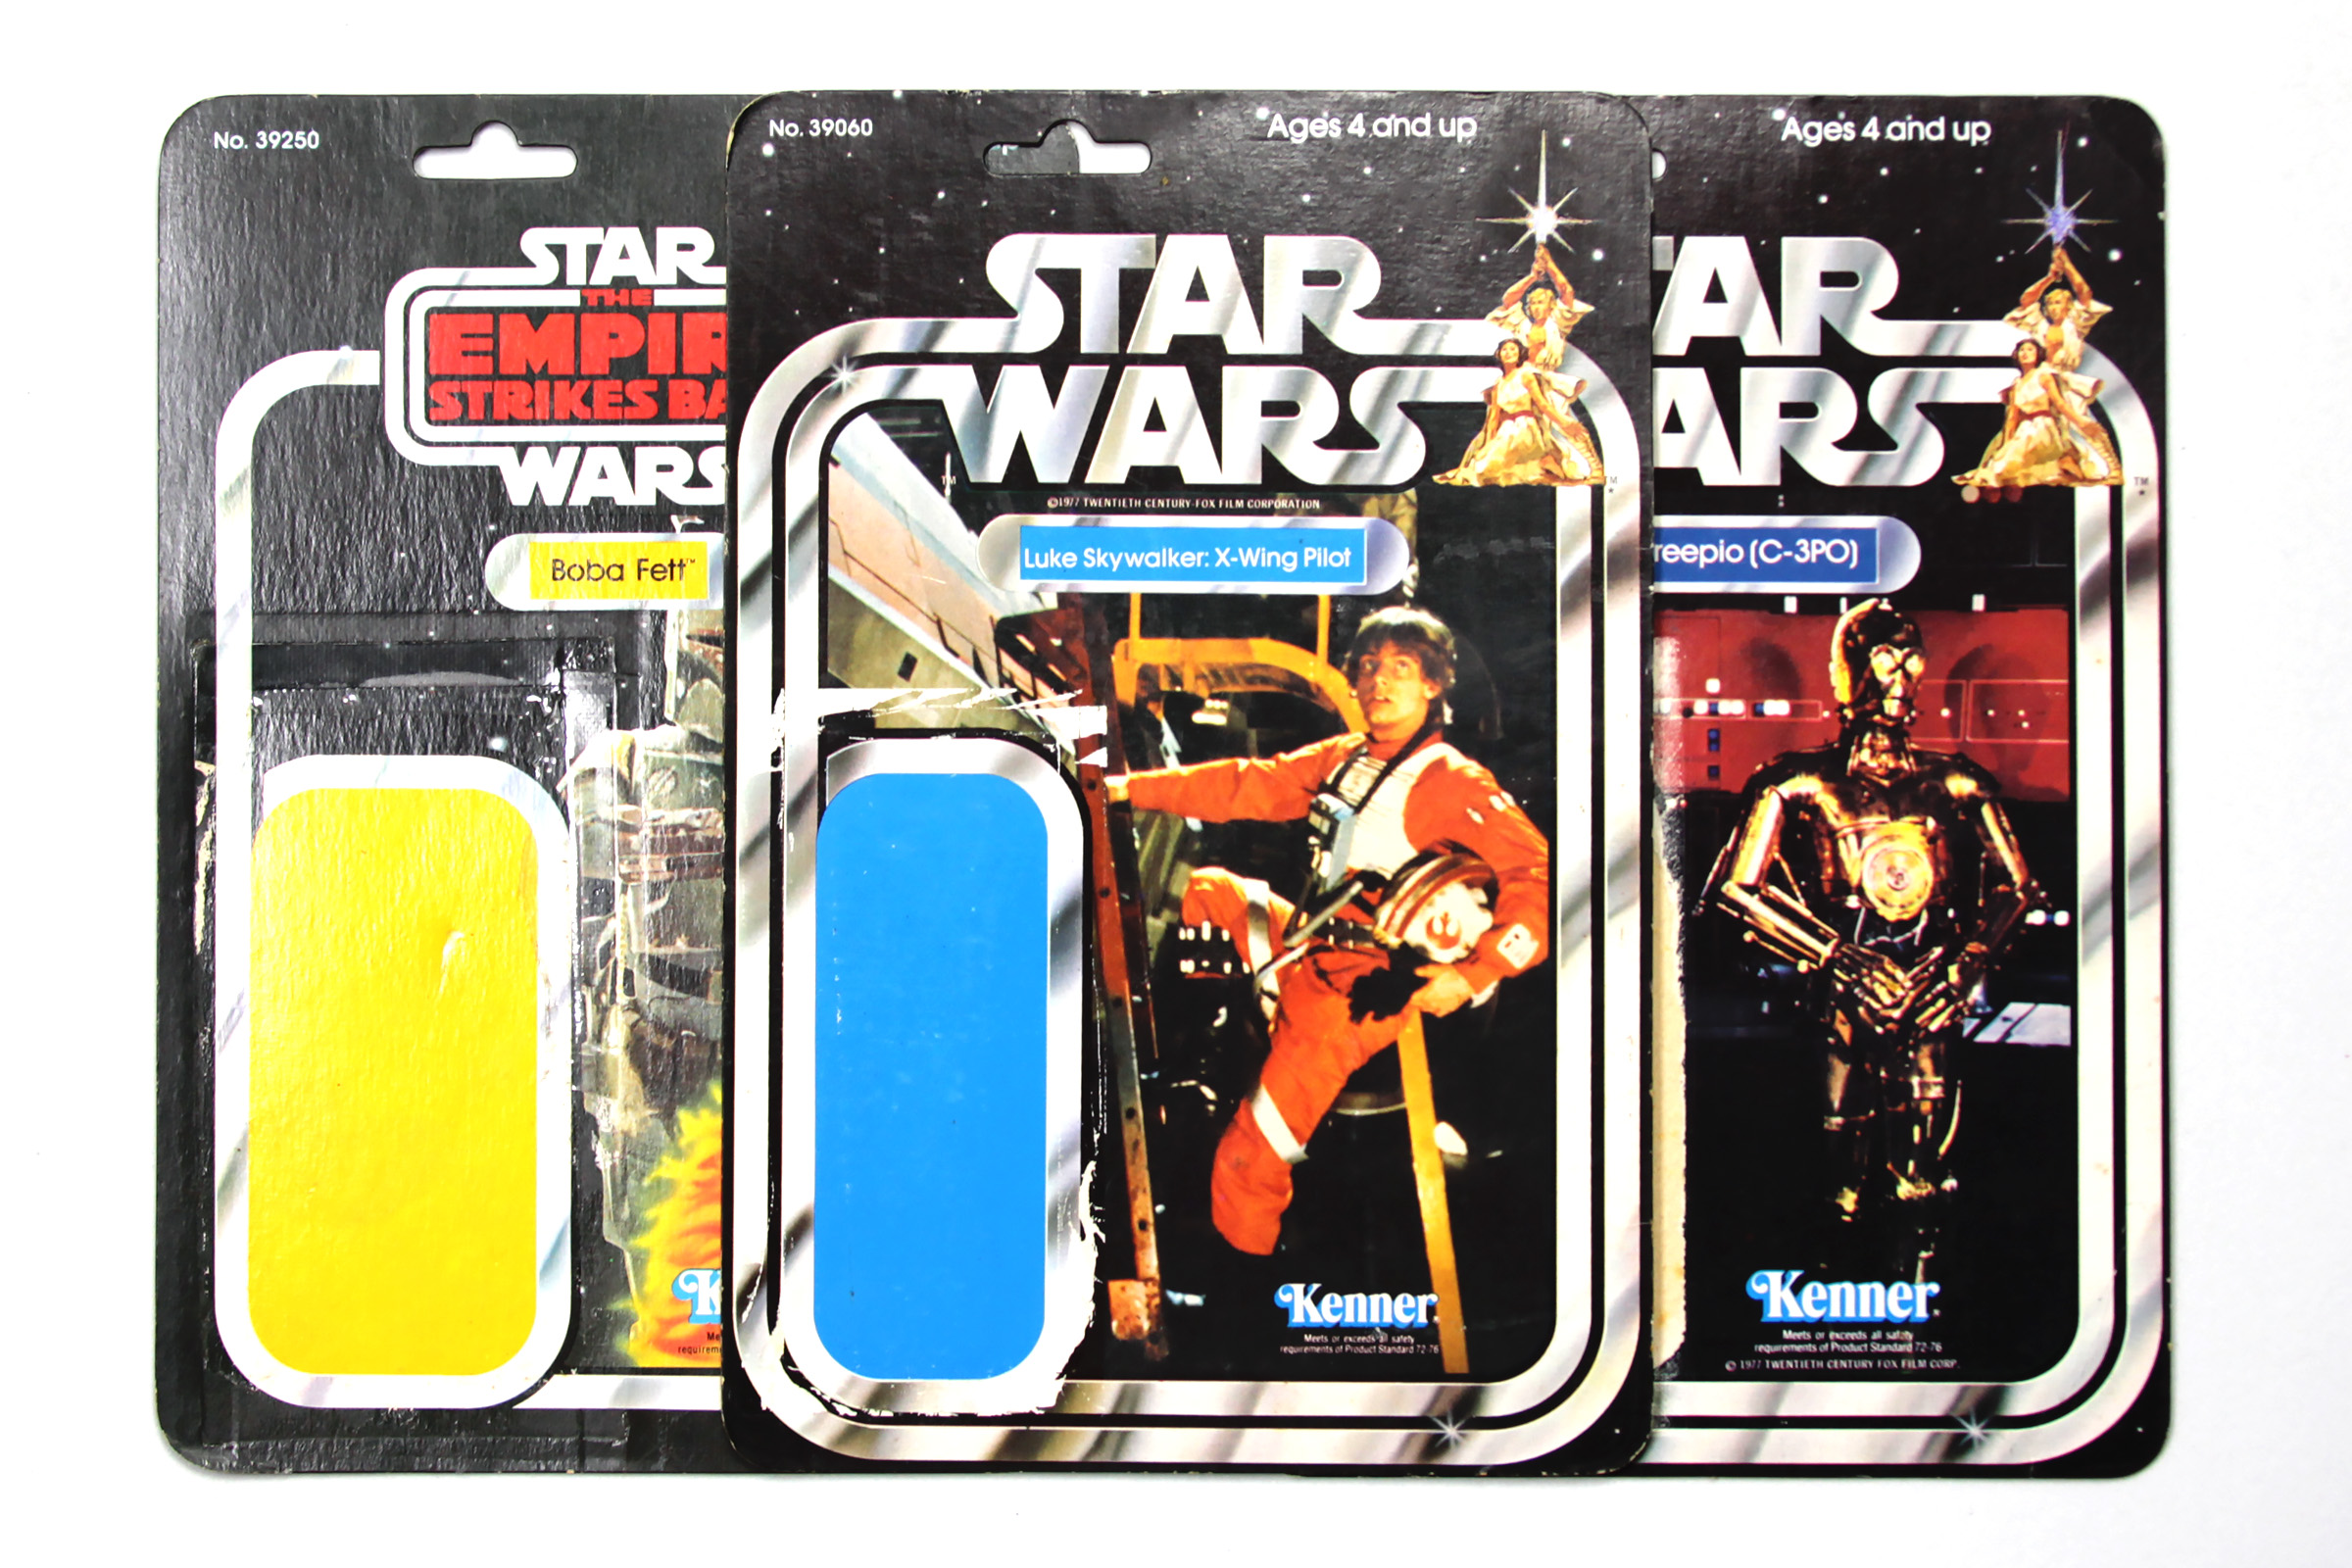 Star Wars Transitional 21-backs (middle and right)